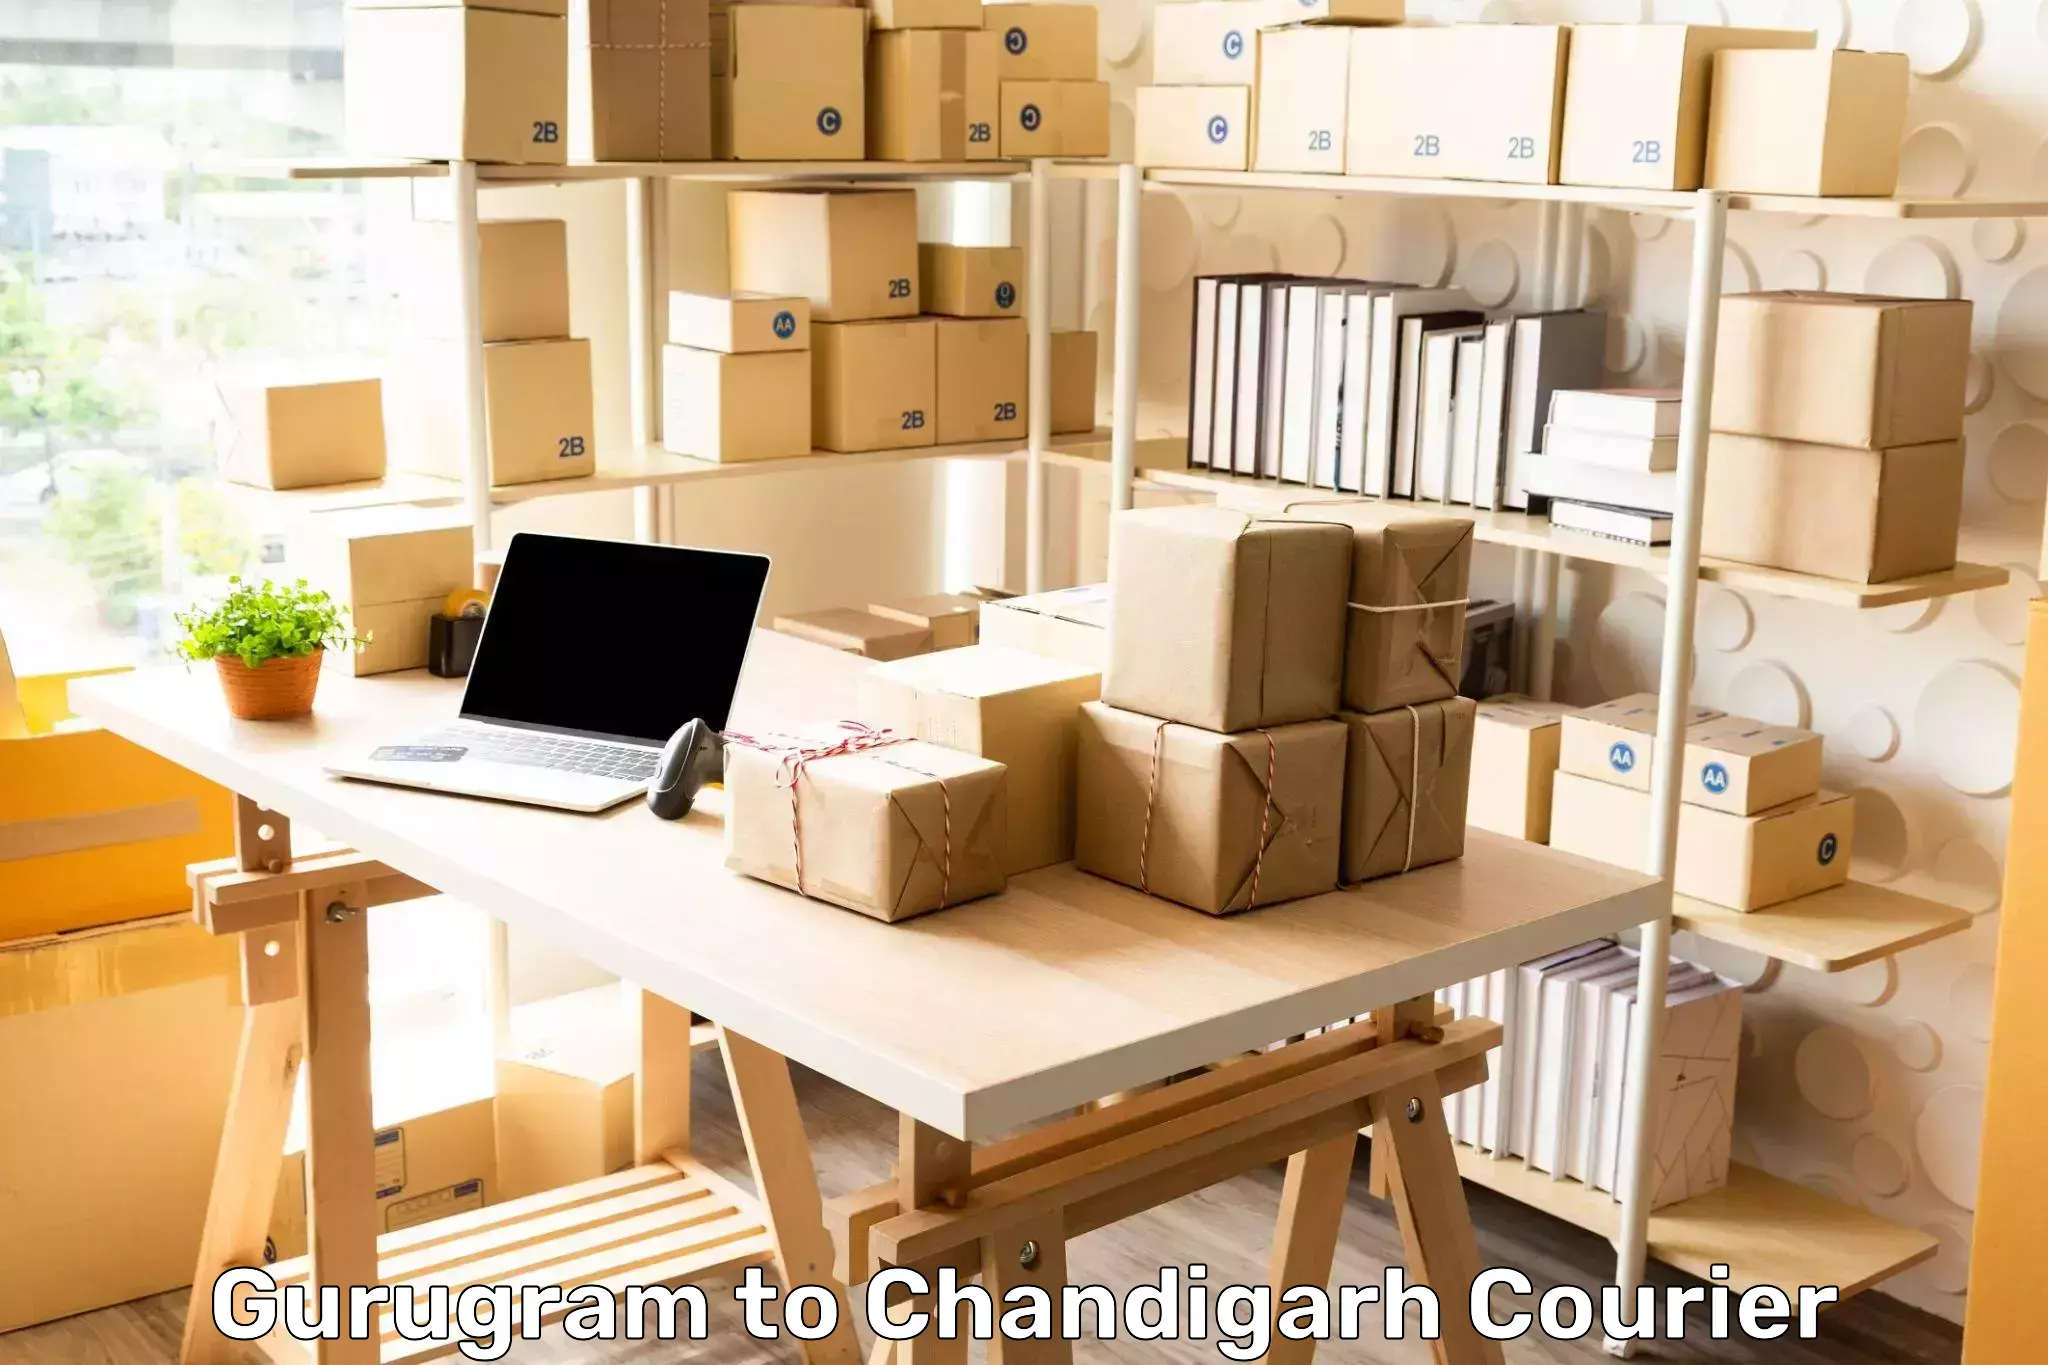 Subscription-based courier Gurugram to Chandigarh